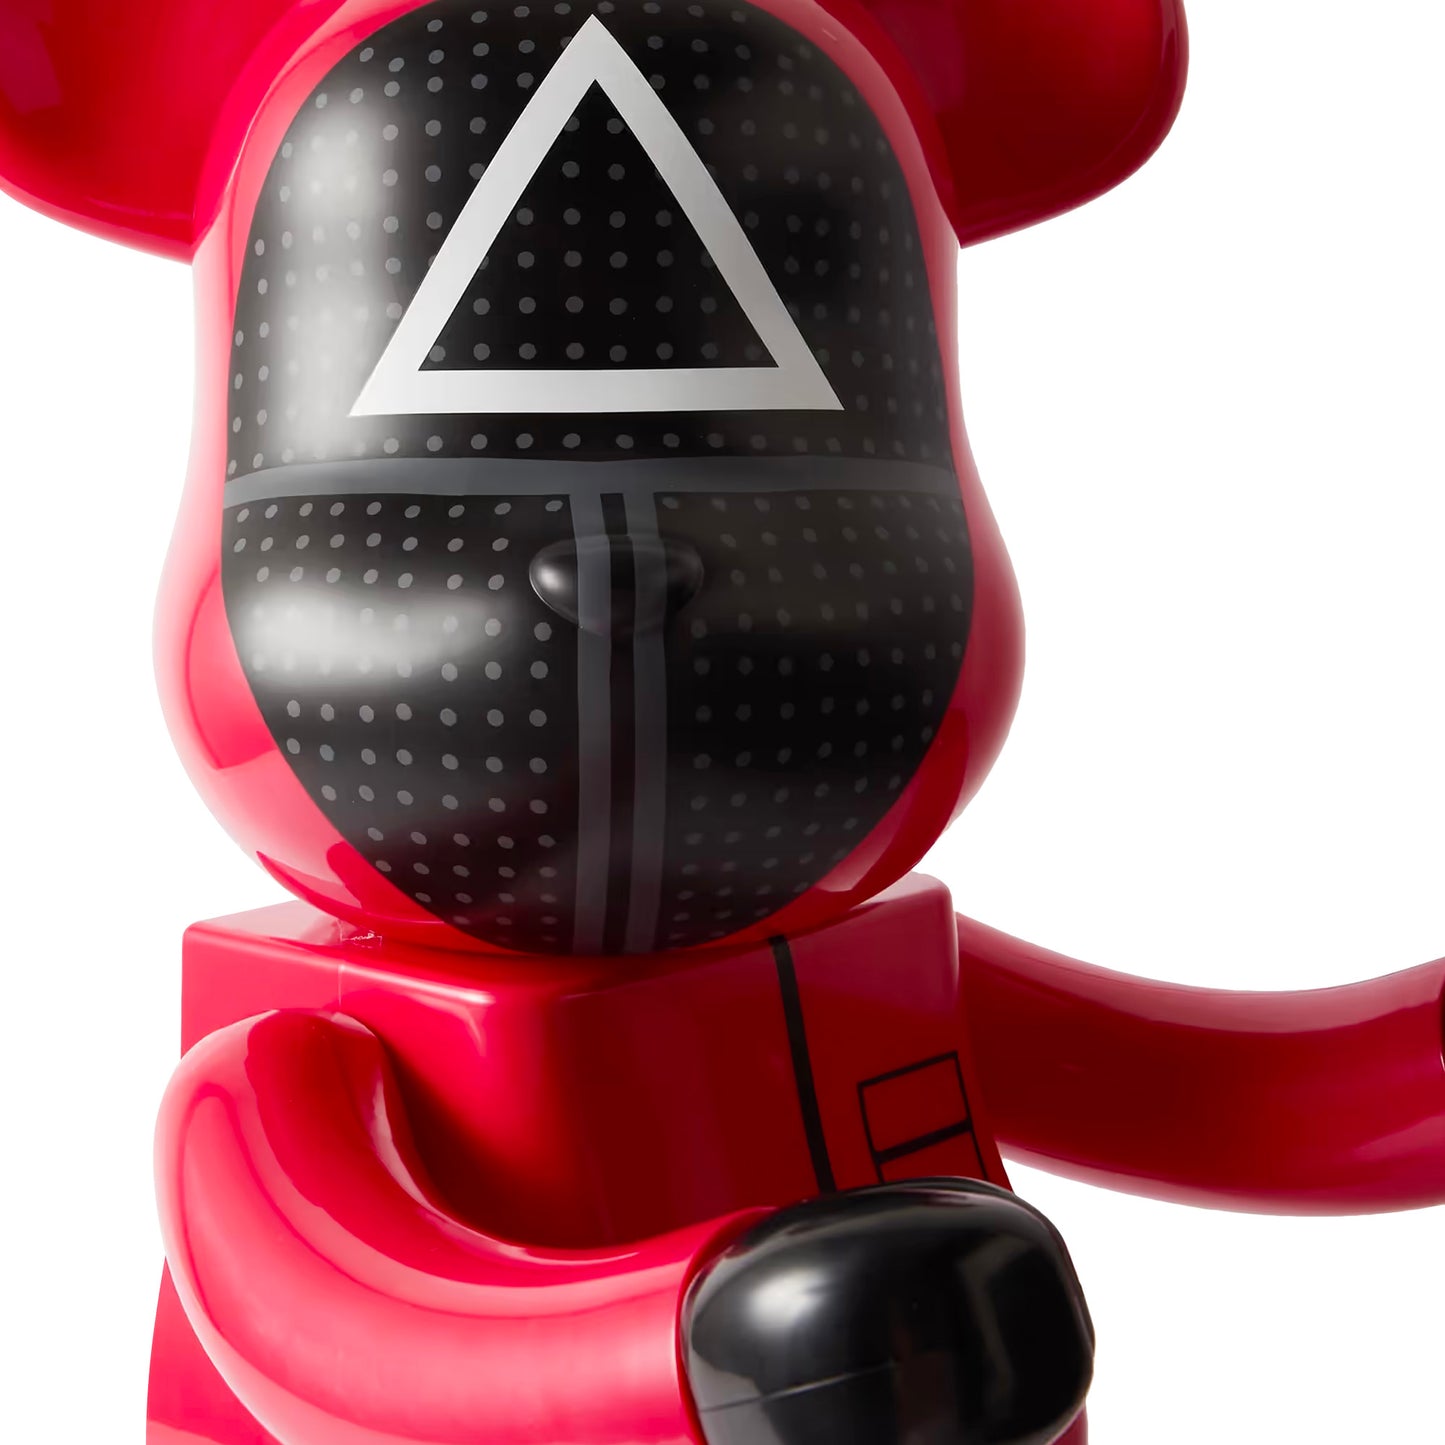 MEDICOM TOY: BE@RBRICK - Squid Game TRIANGLE Guard 1000%